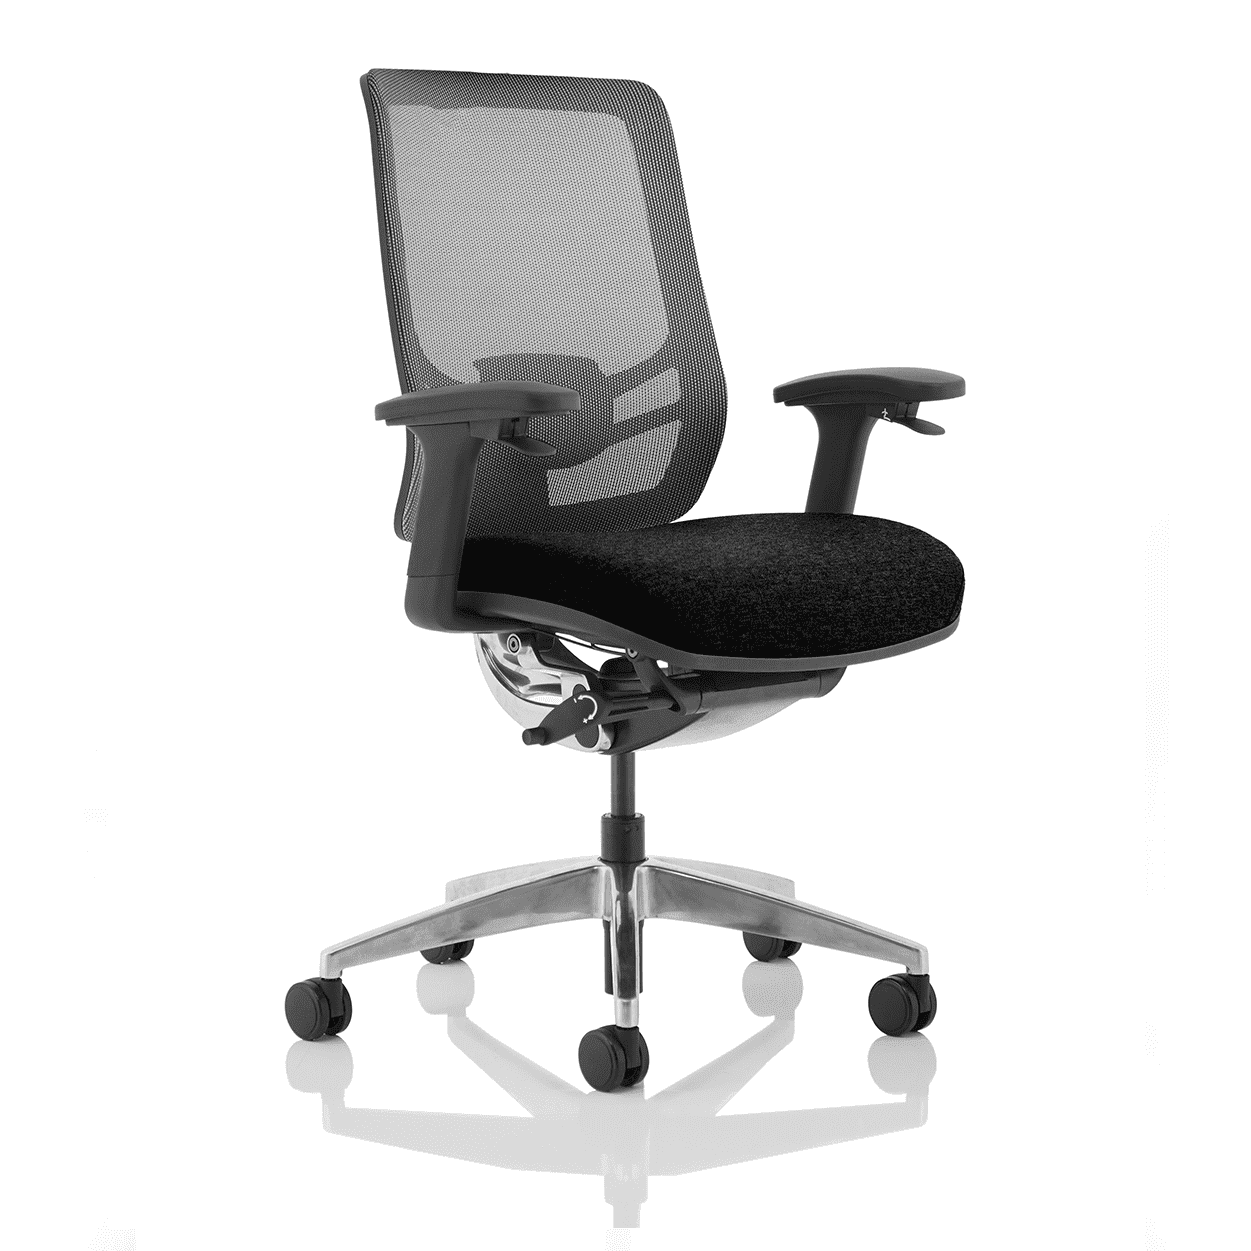 Ergo Click High Back Ergonomic Office Chair - Mesh Seat & Back, Adjustable Arms, Lumbar Support, 135kg Capacity, 24hr Use - Chrome Frame